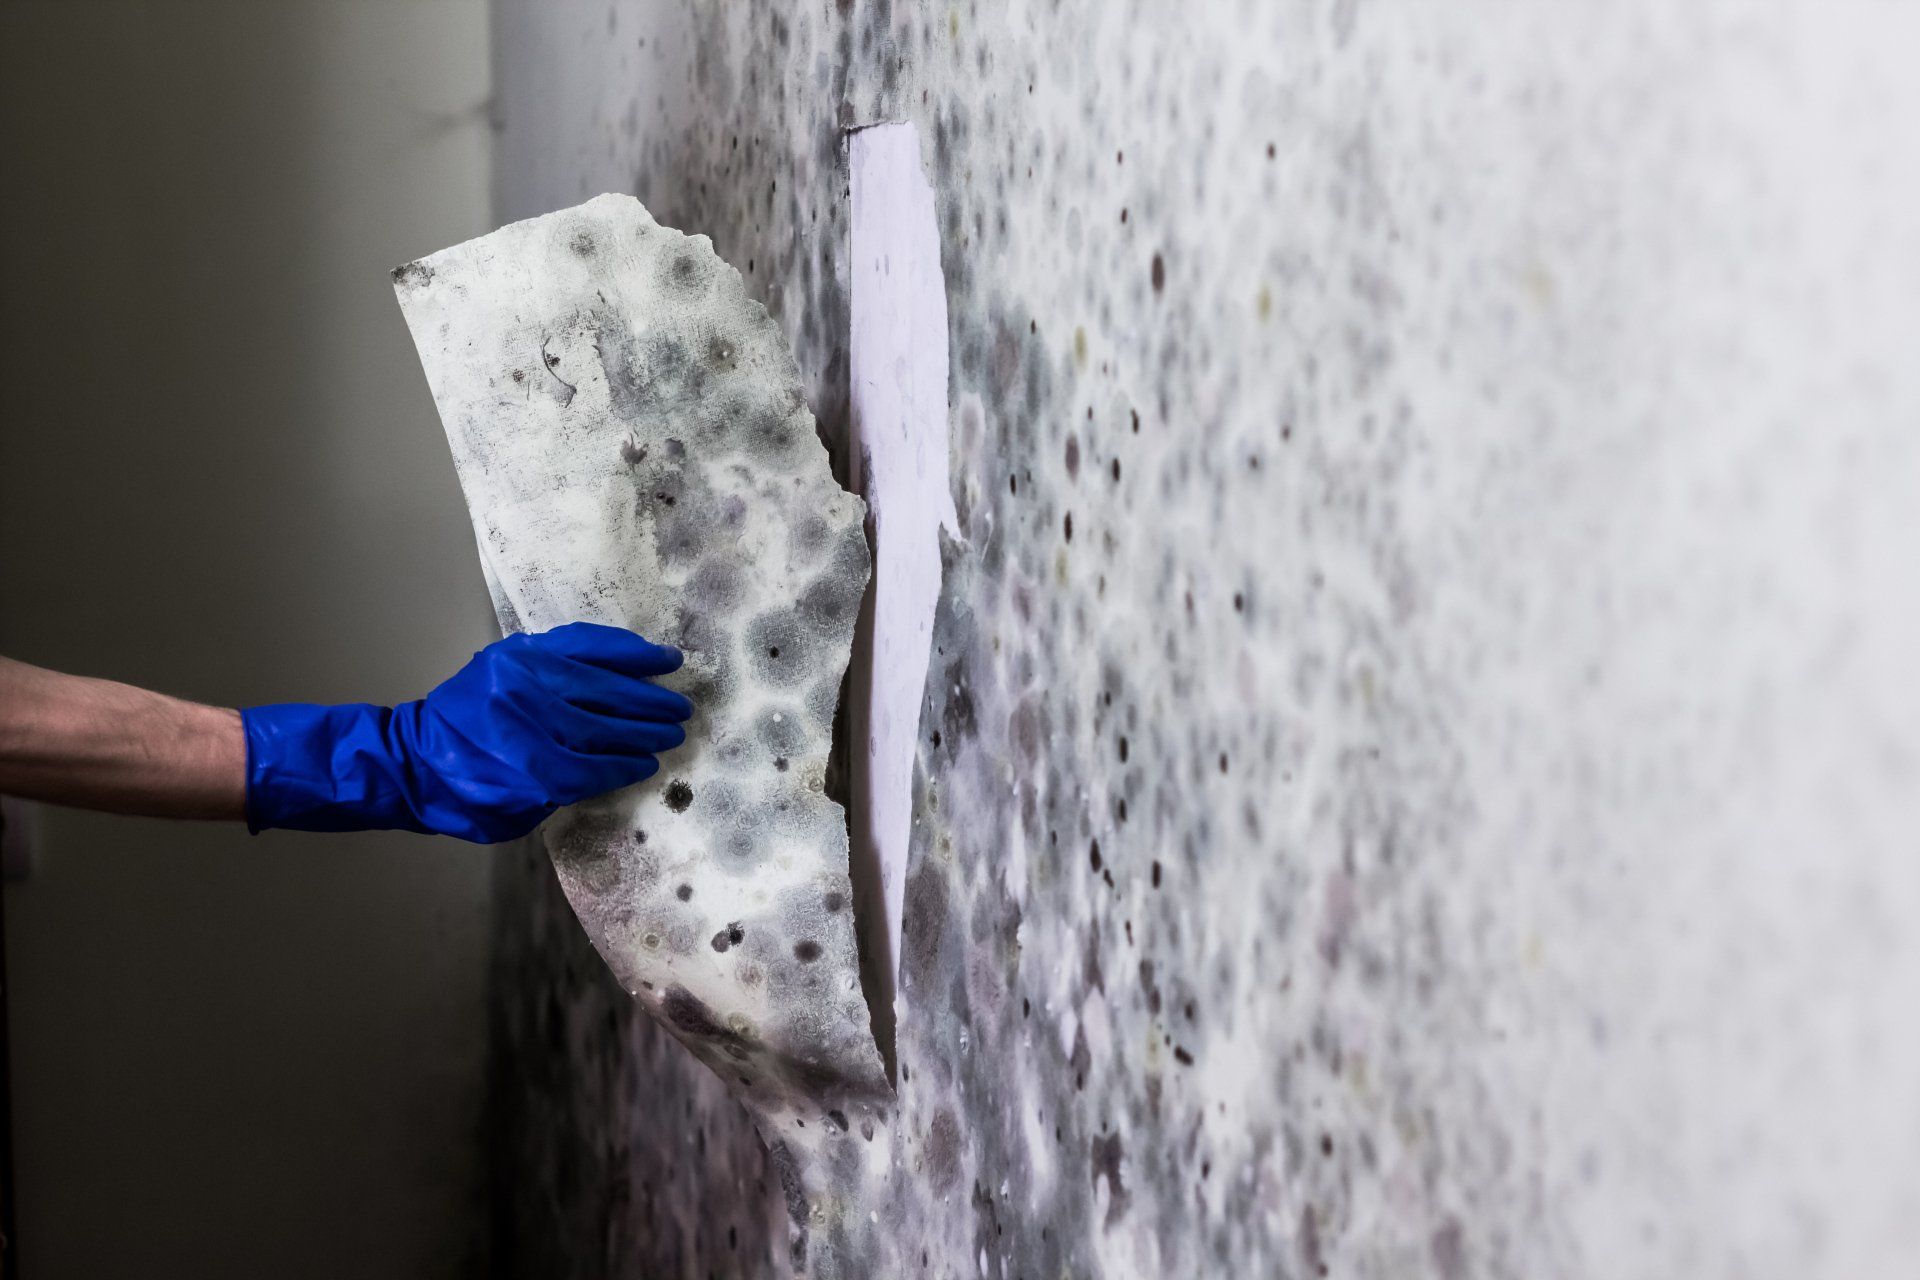 close shot of a hand scratching mold from a wall, wearing blue gloves.